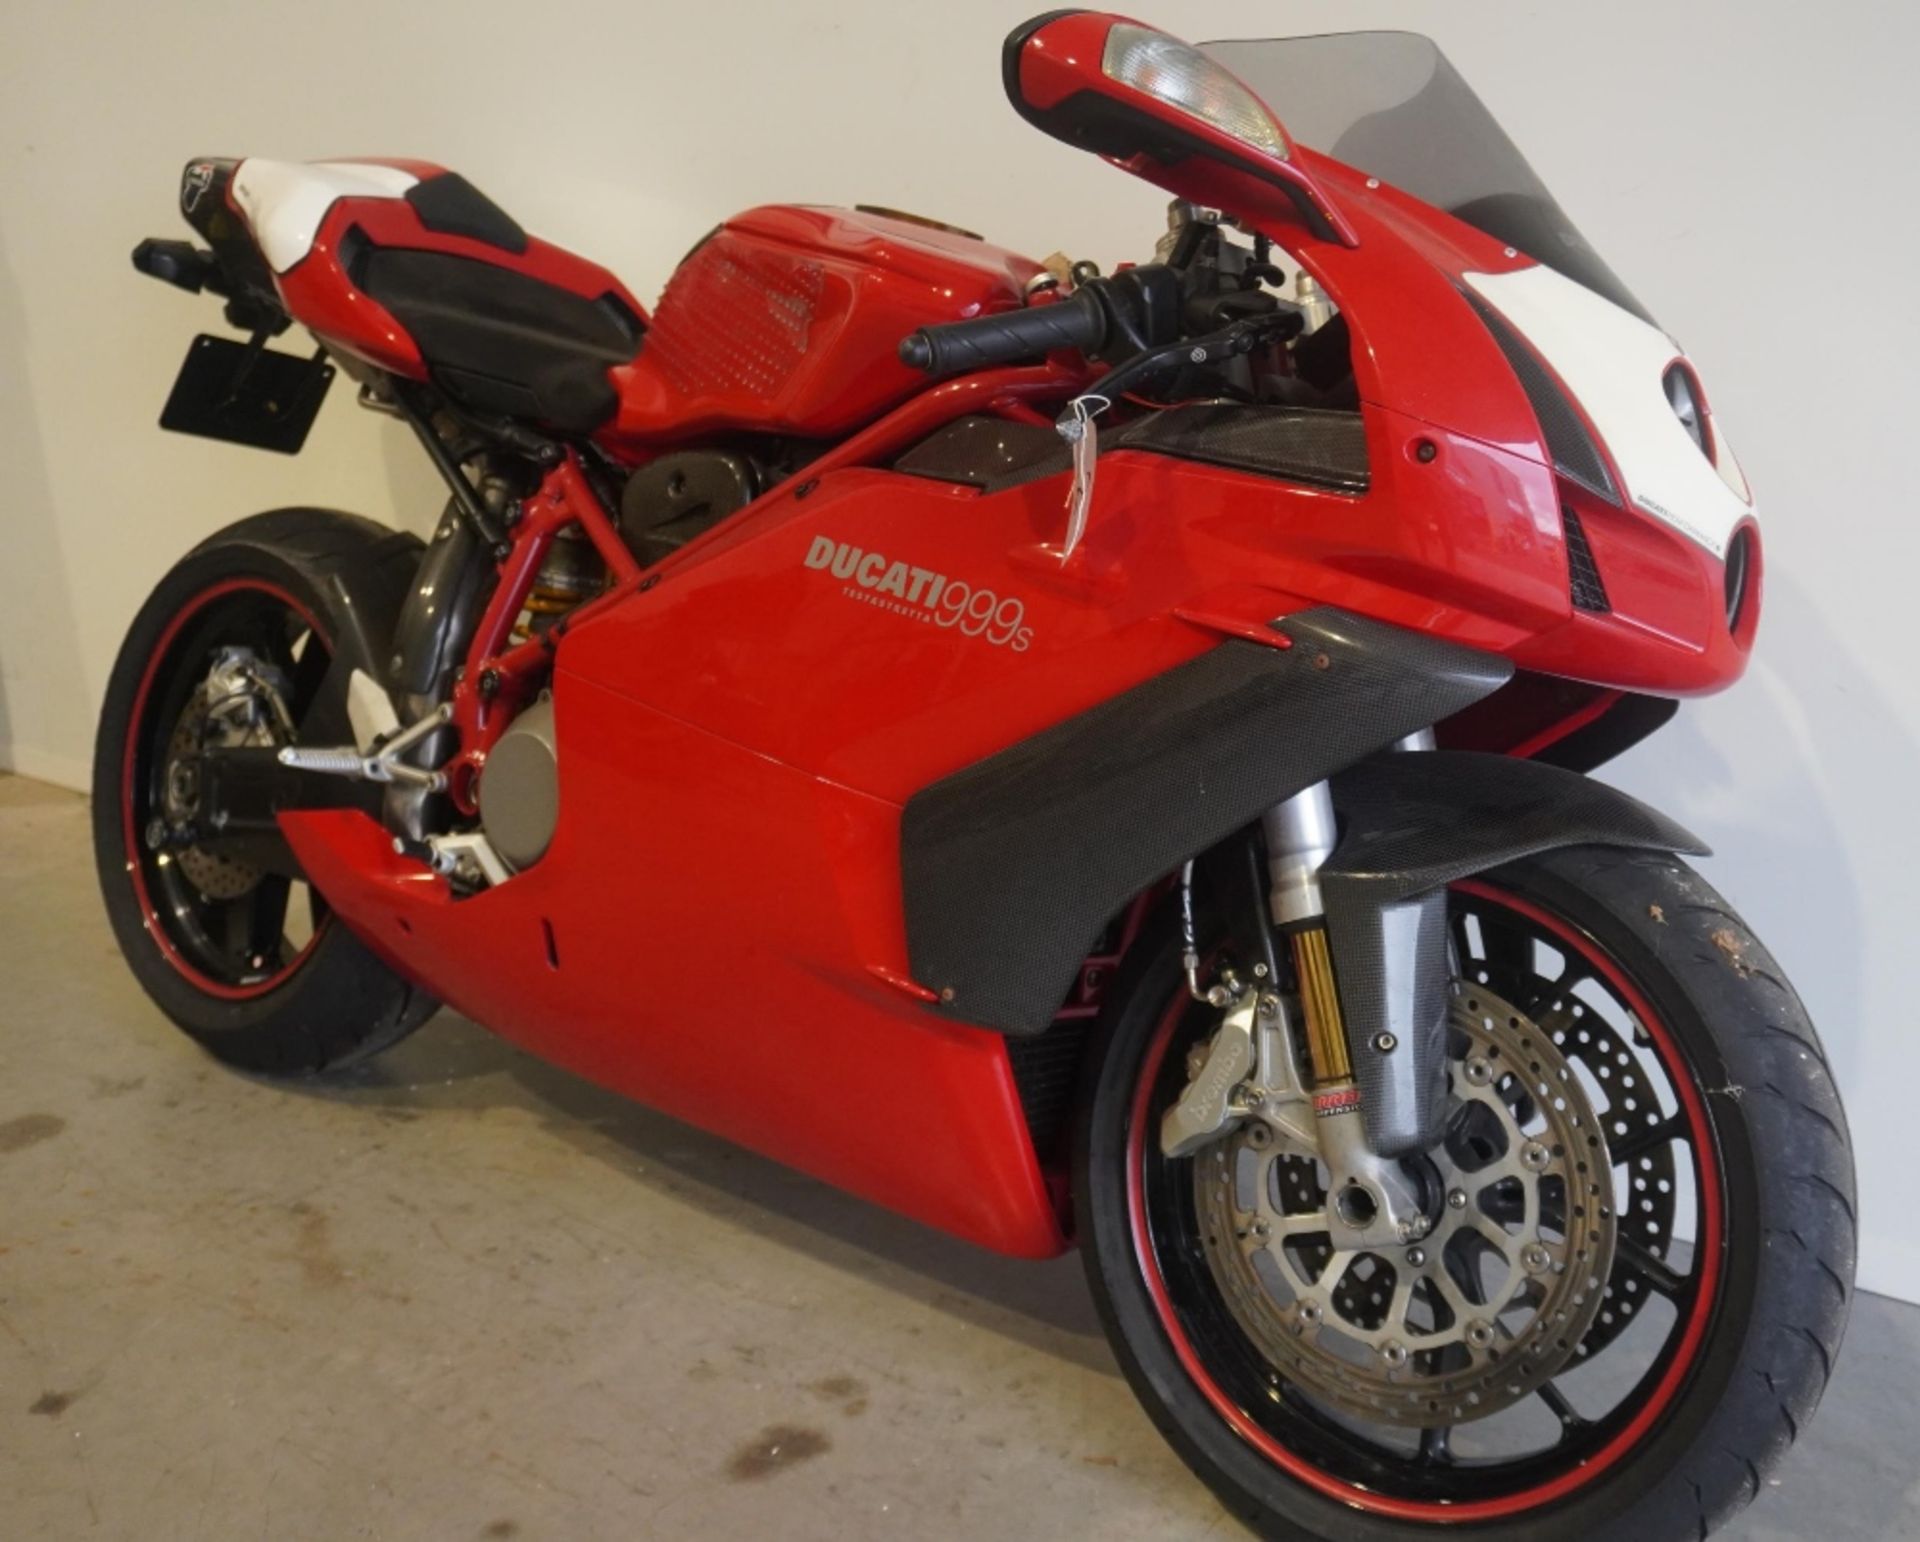 Ducati 999s motorcycle. 2005. 998cc. Runs but needs new battery. Comes with folder of history and - Image 2 of 6